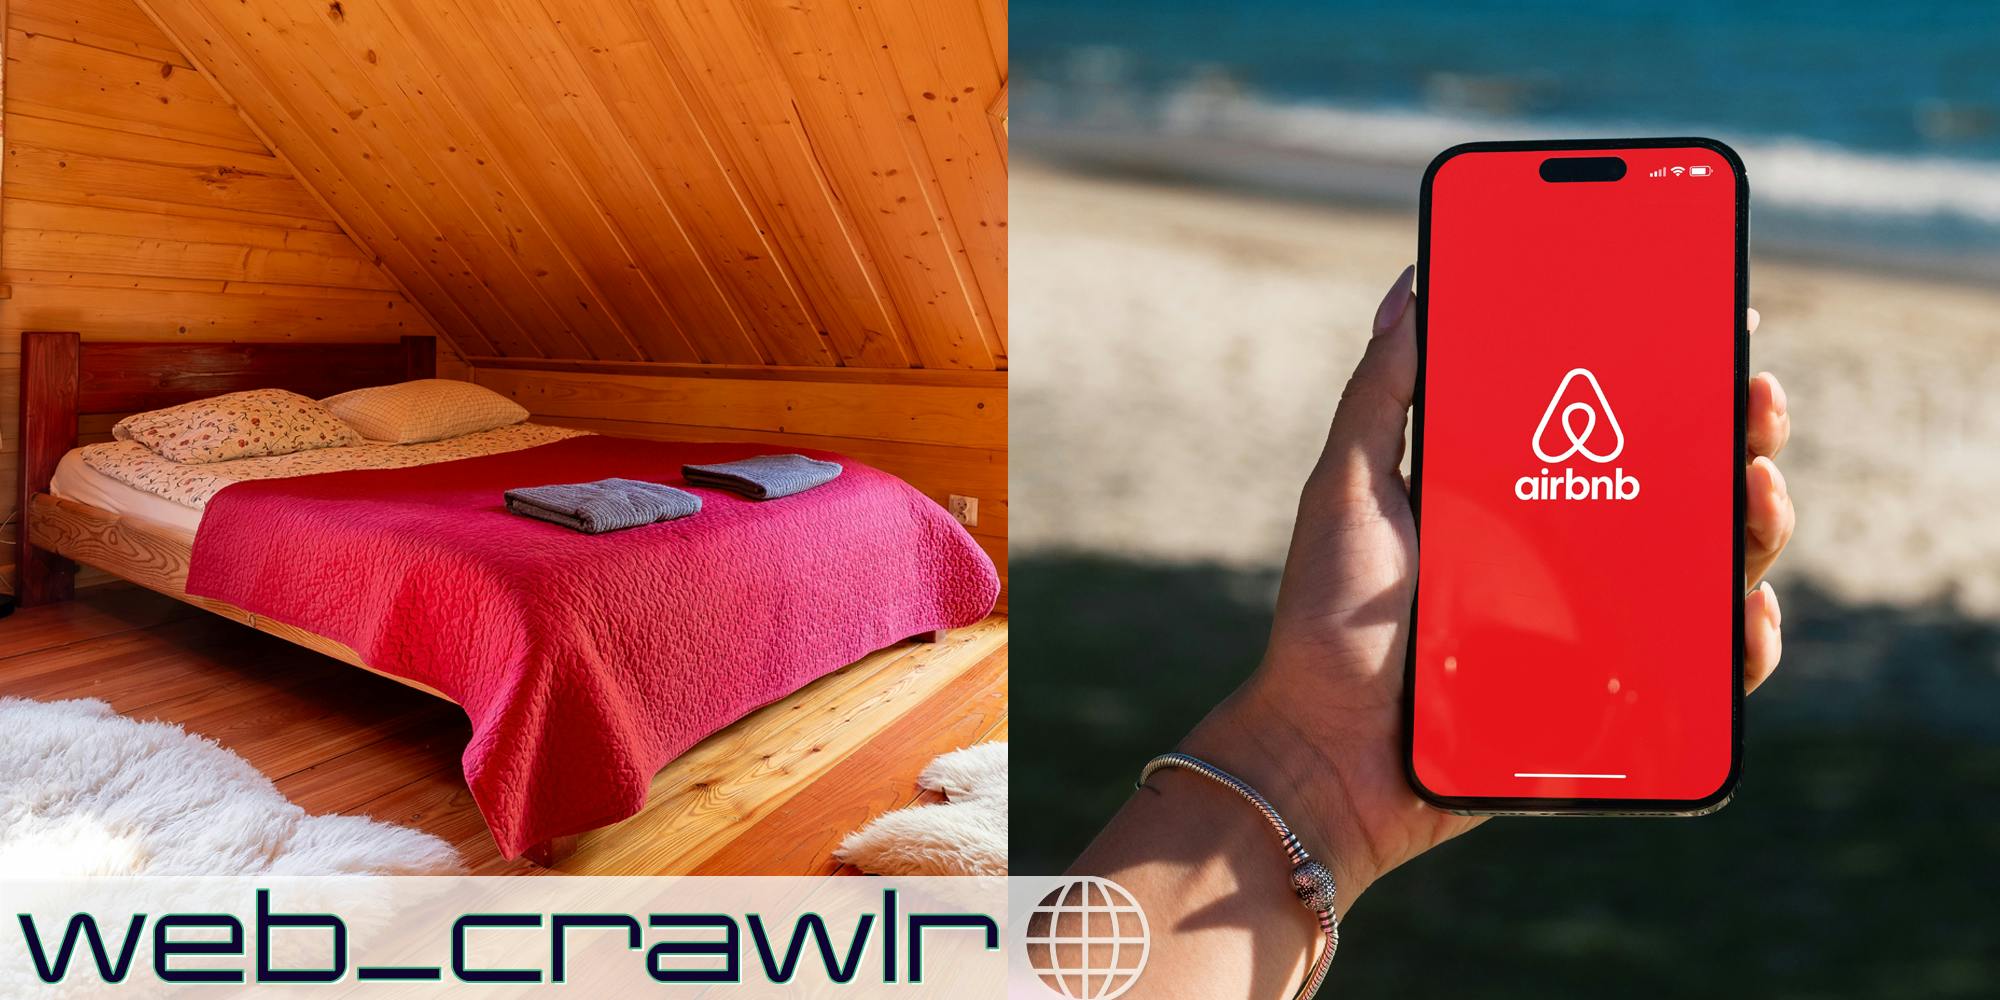 A side-by-side of a bed and a person holding a phone with the Airbnb logo on it. The Daily Dot newsletter web_crawlr logo is in the bottom left corner.